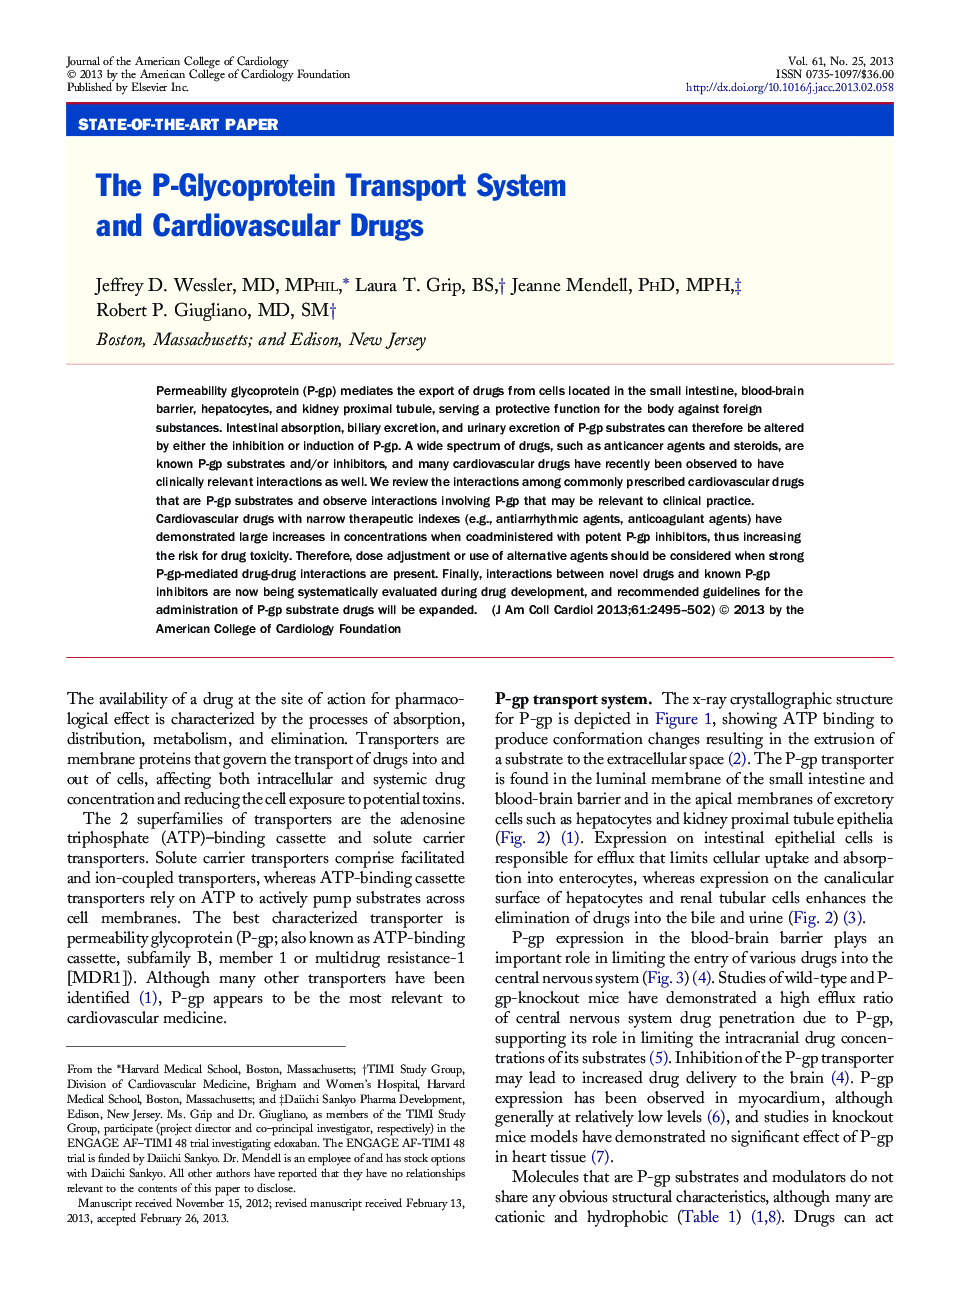 The P-Glycoprotein Transport System and Cardiovascular Drugs 